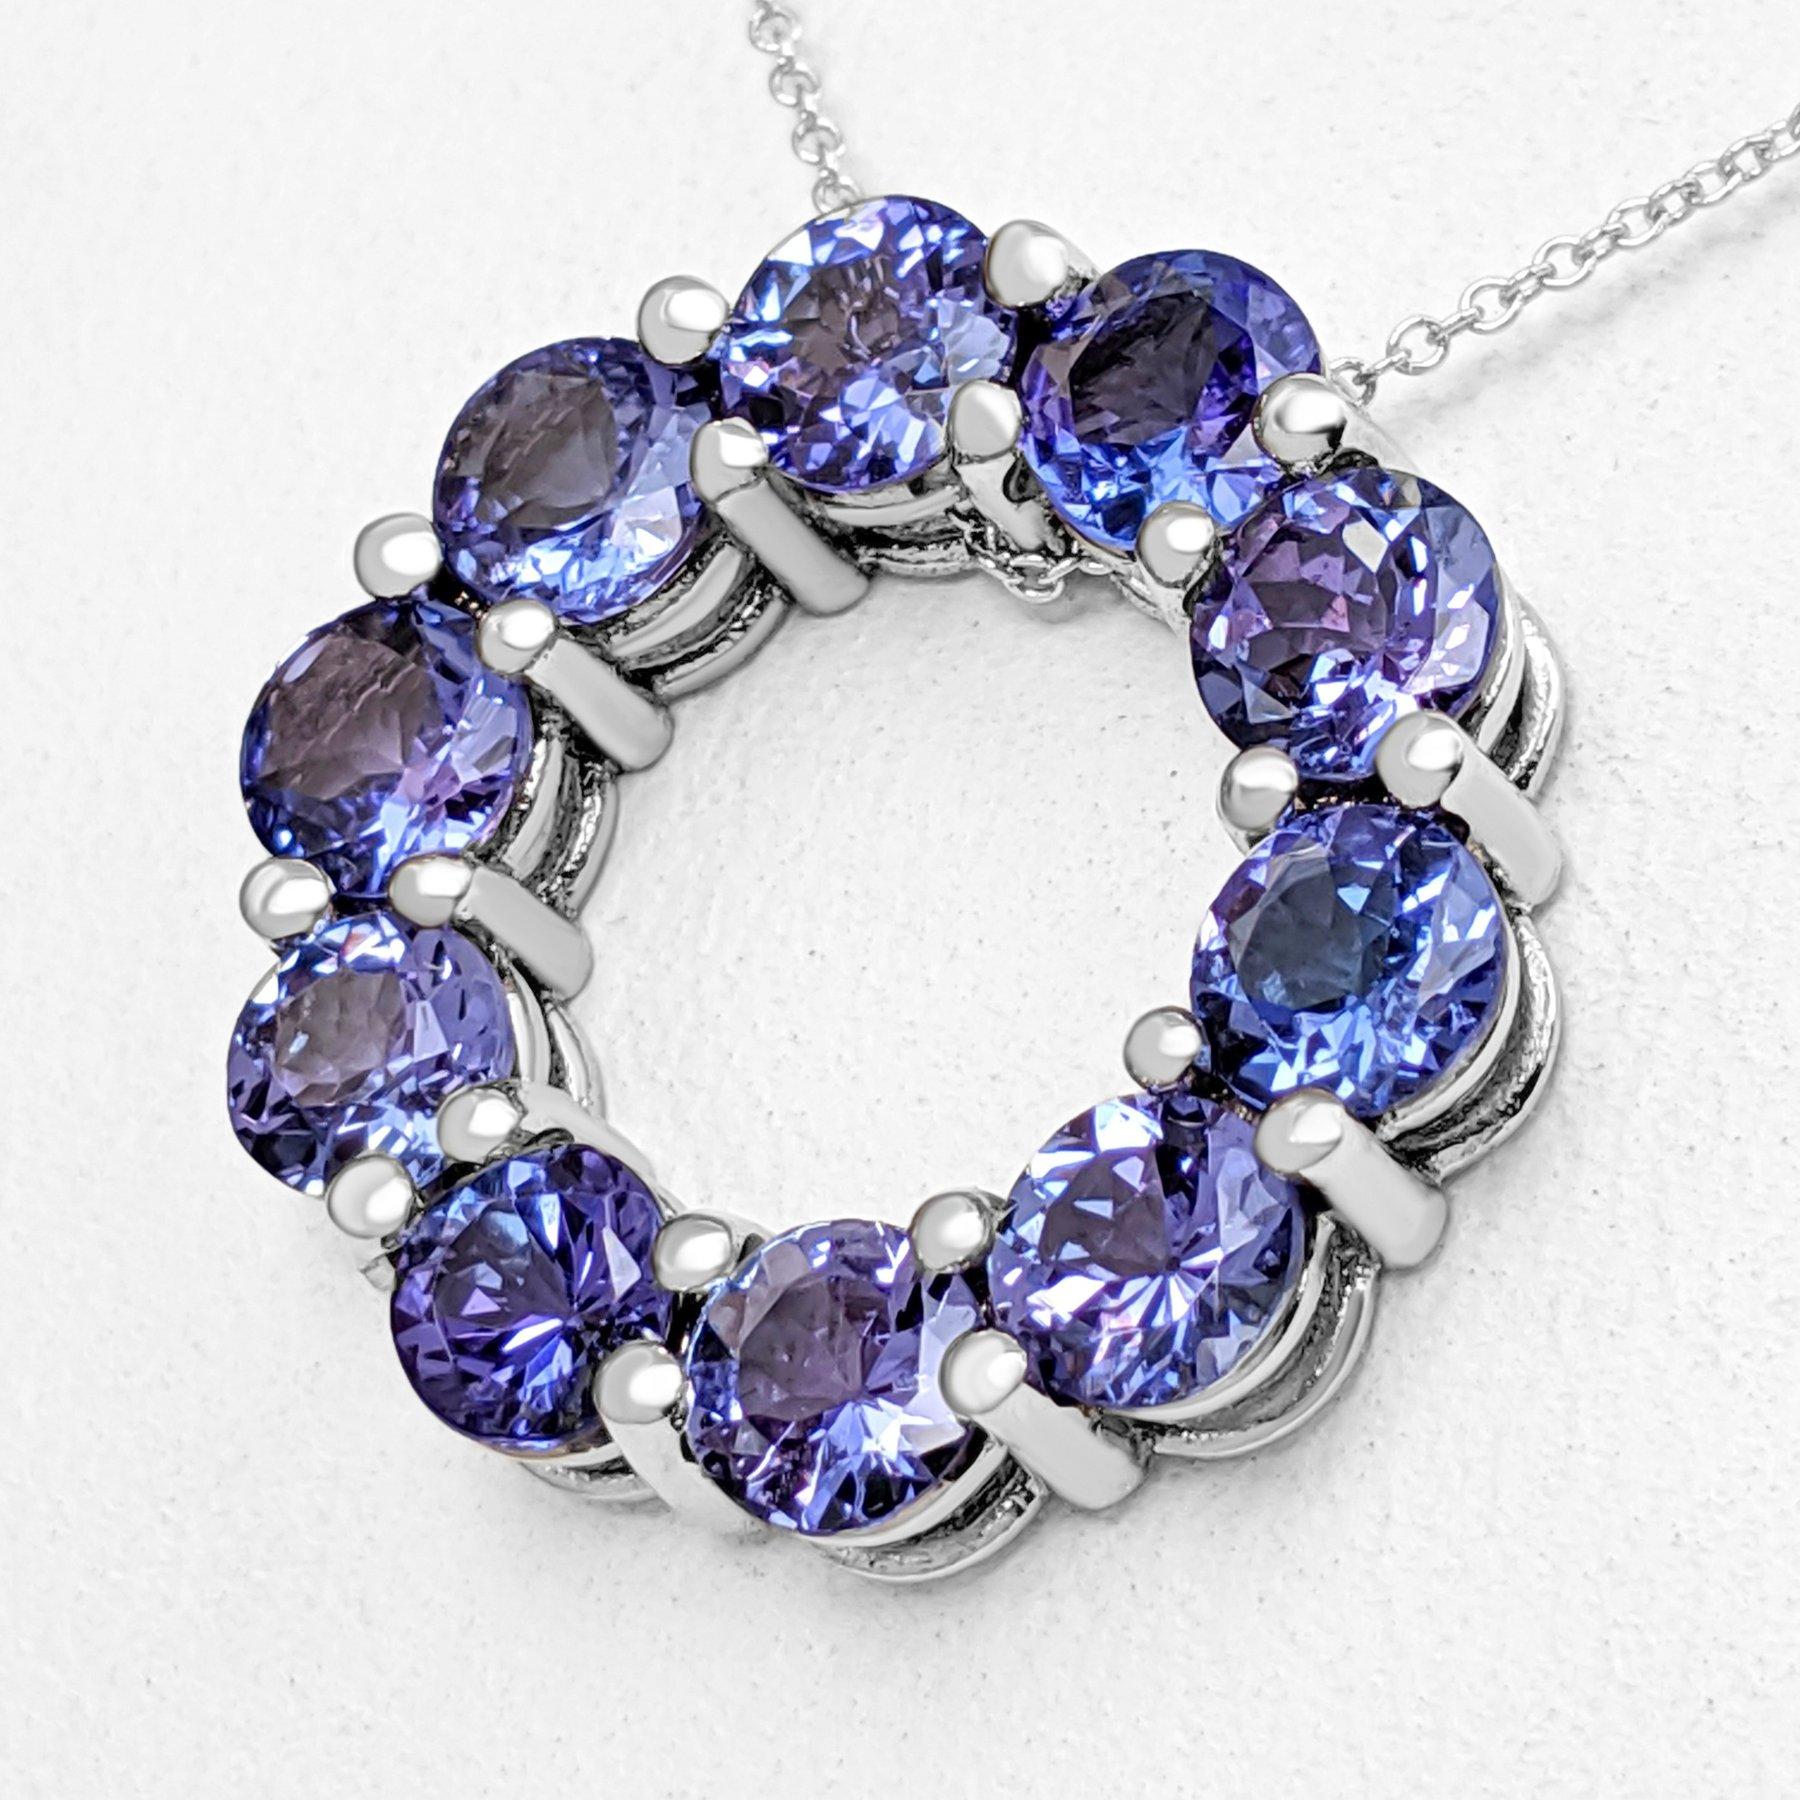 Women's $1 NO RESERVE!   5.23cttw Tanzanite, 14K White Gold Necklace With Pendant For Sale